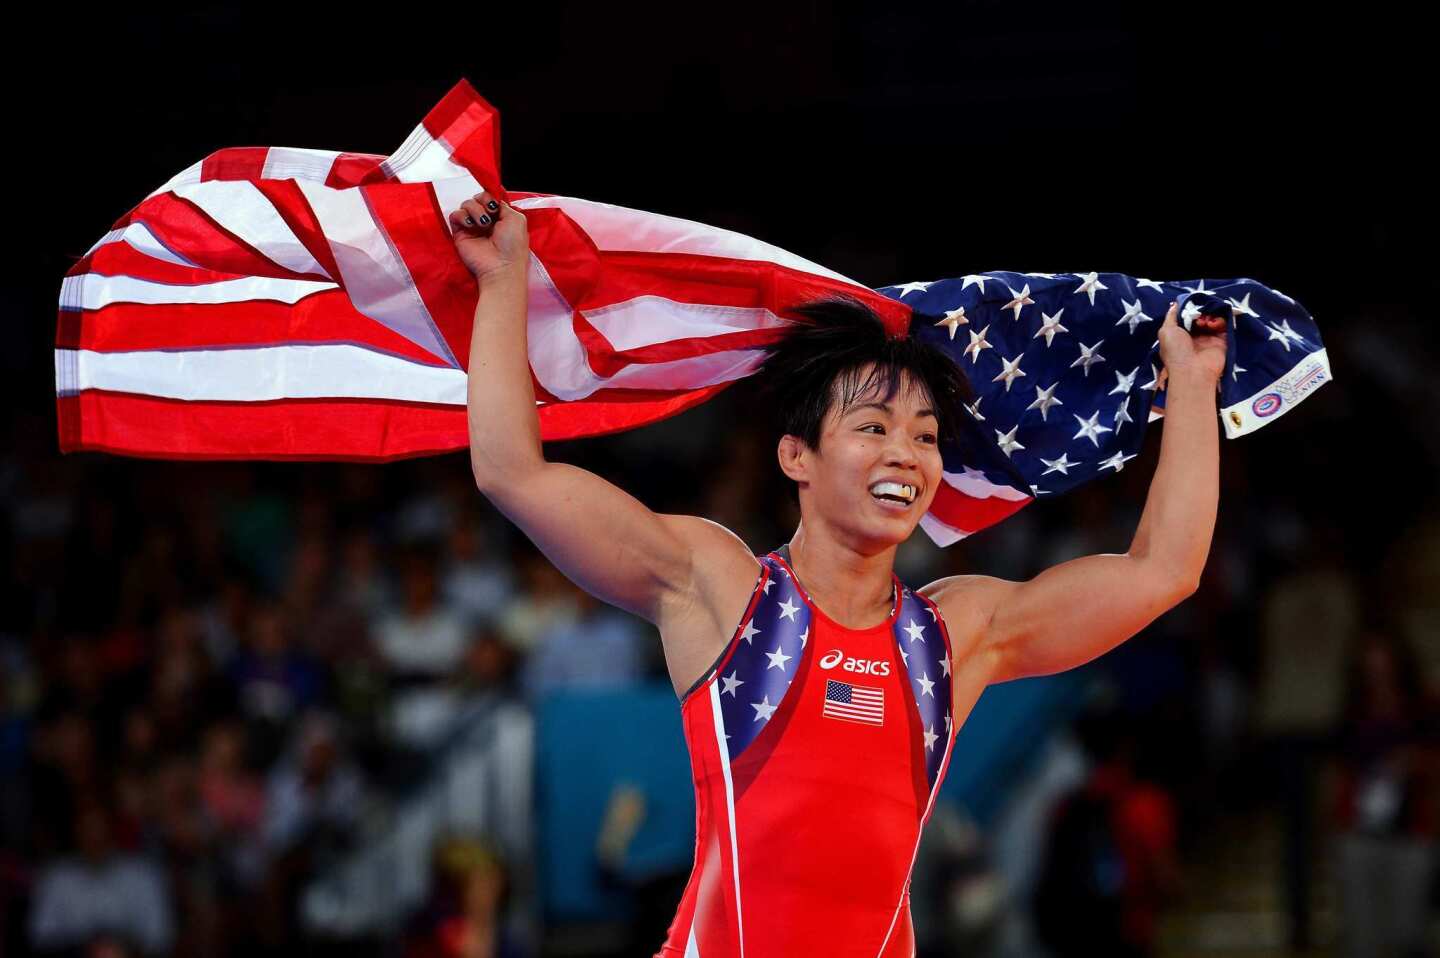 Clarissa Chun of the United States celebrates winning the bronze medal in the 105.5-pound class of women's freestyle wrestling Wednesday.